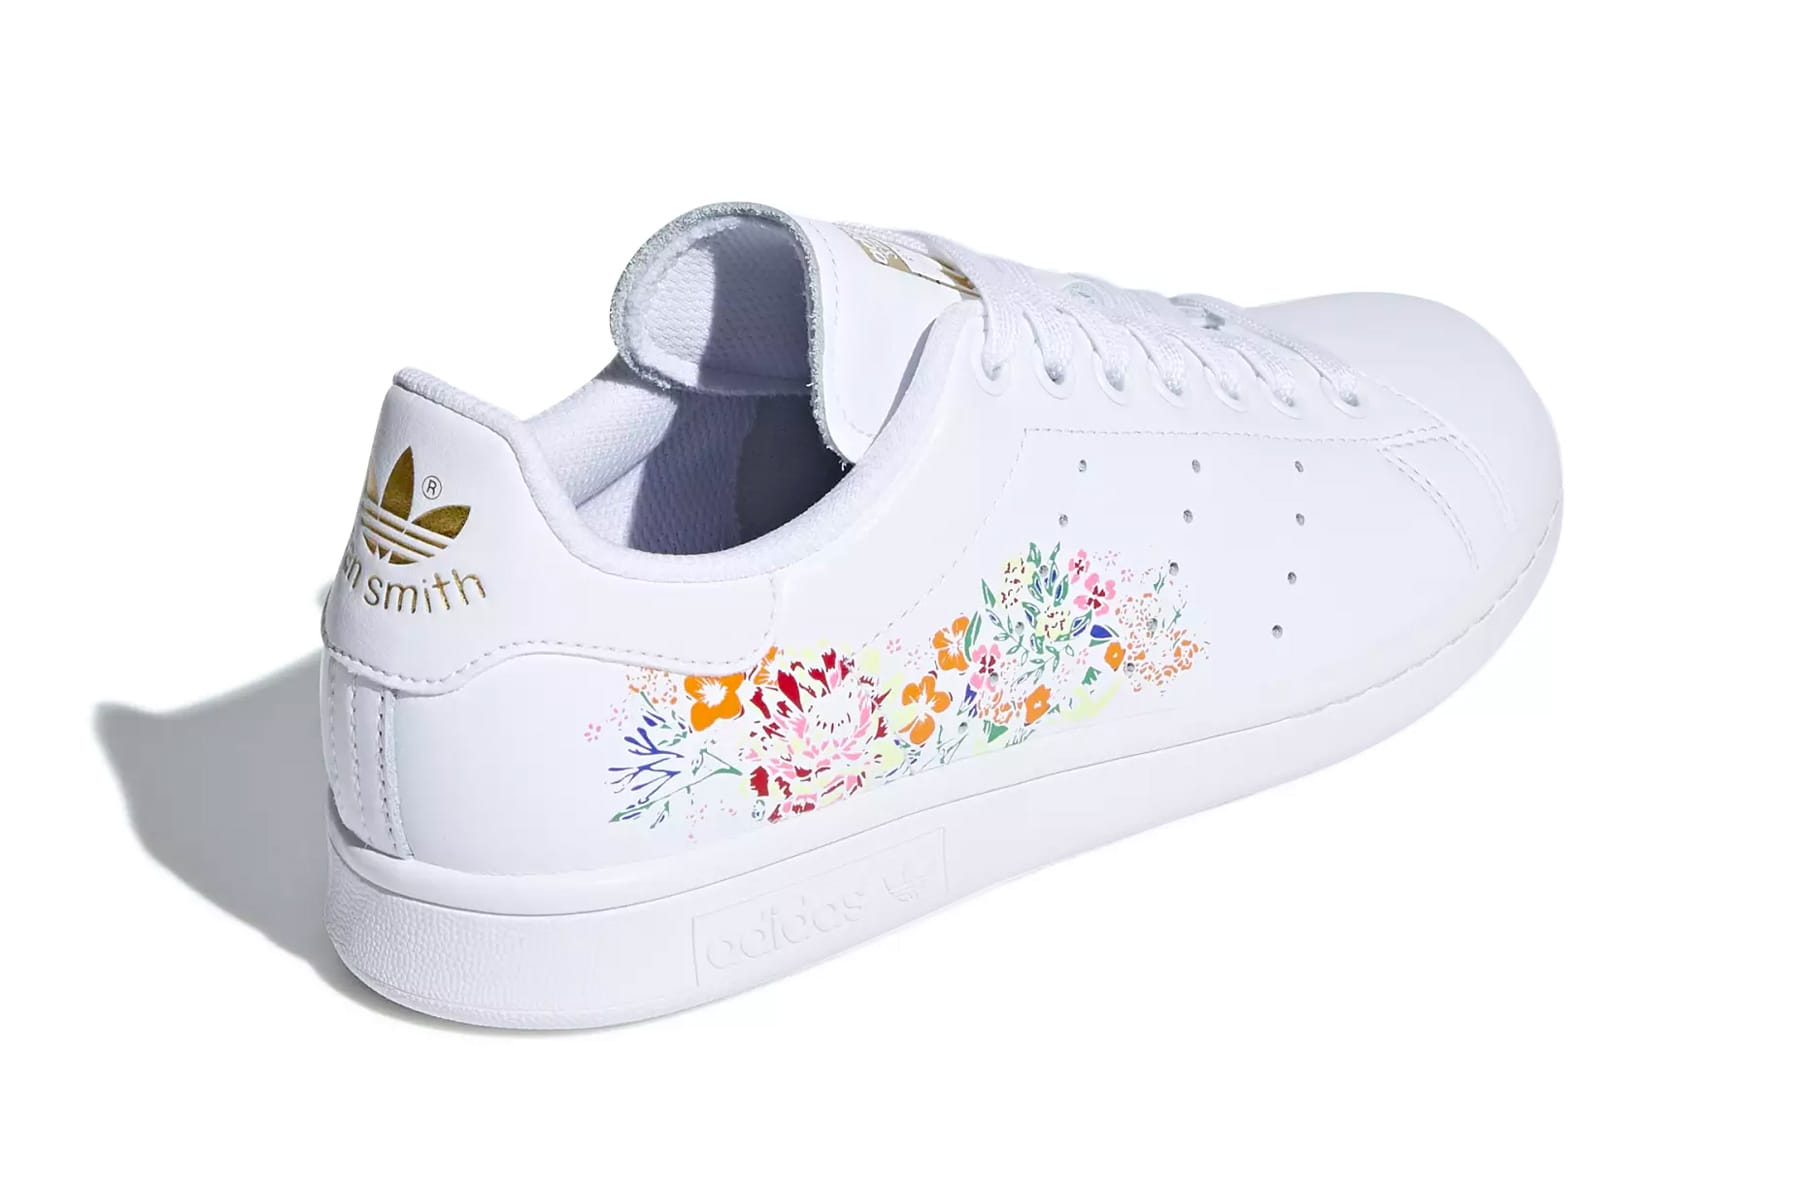 Floral-Themed Stan Smiths 